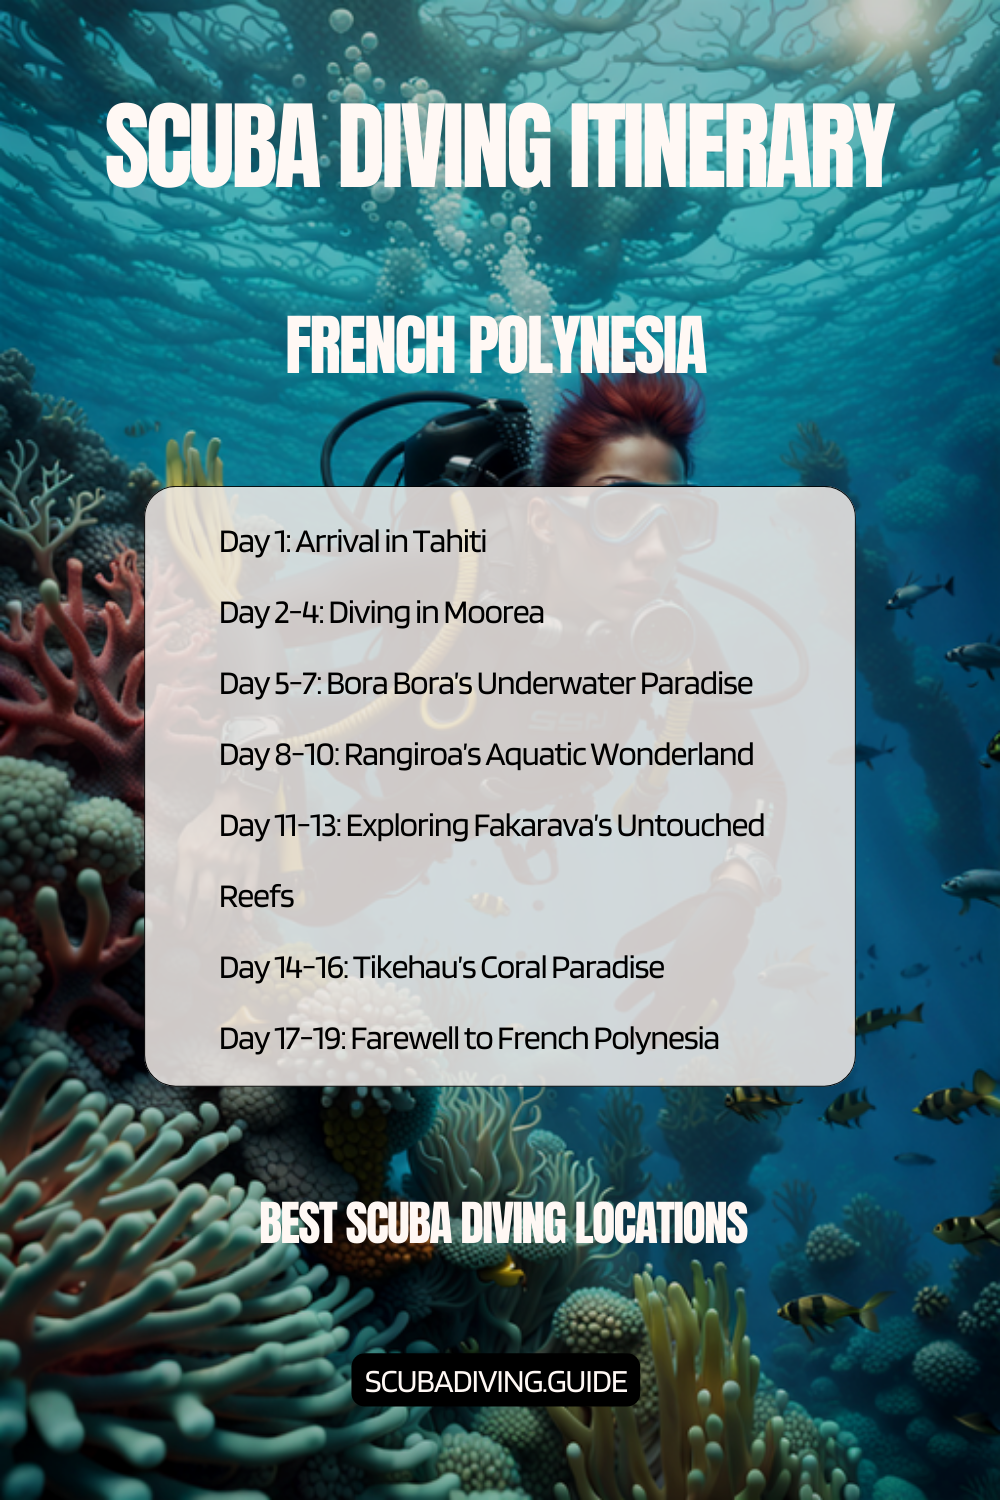 French Polynesia Recommended Scuba Diving Itinerary